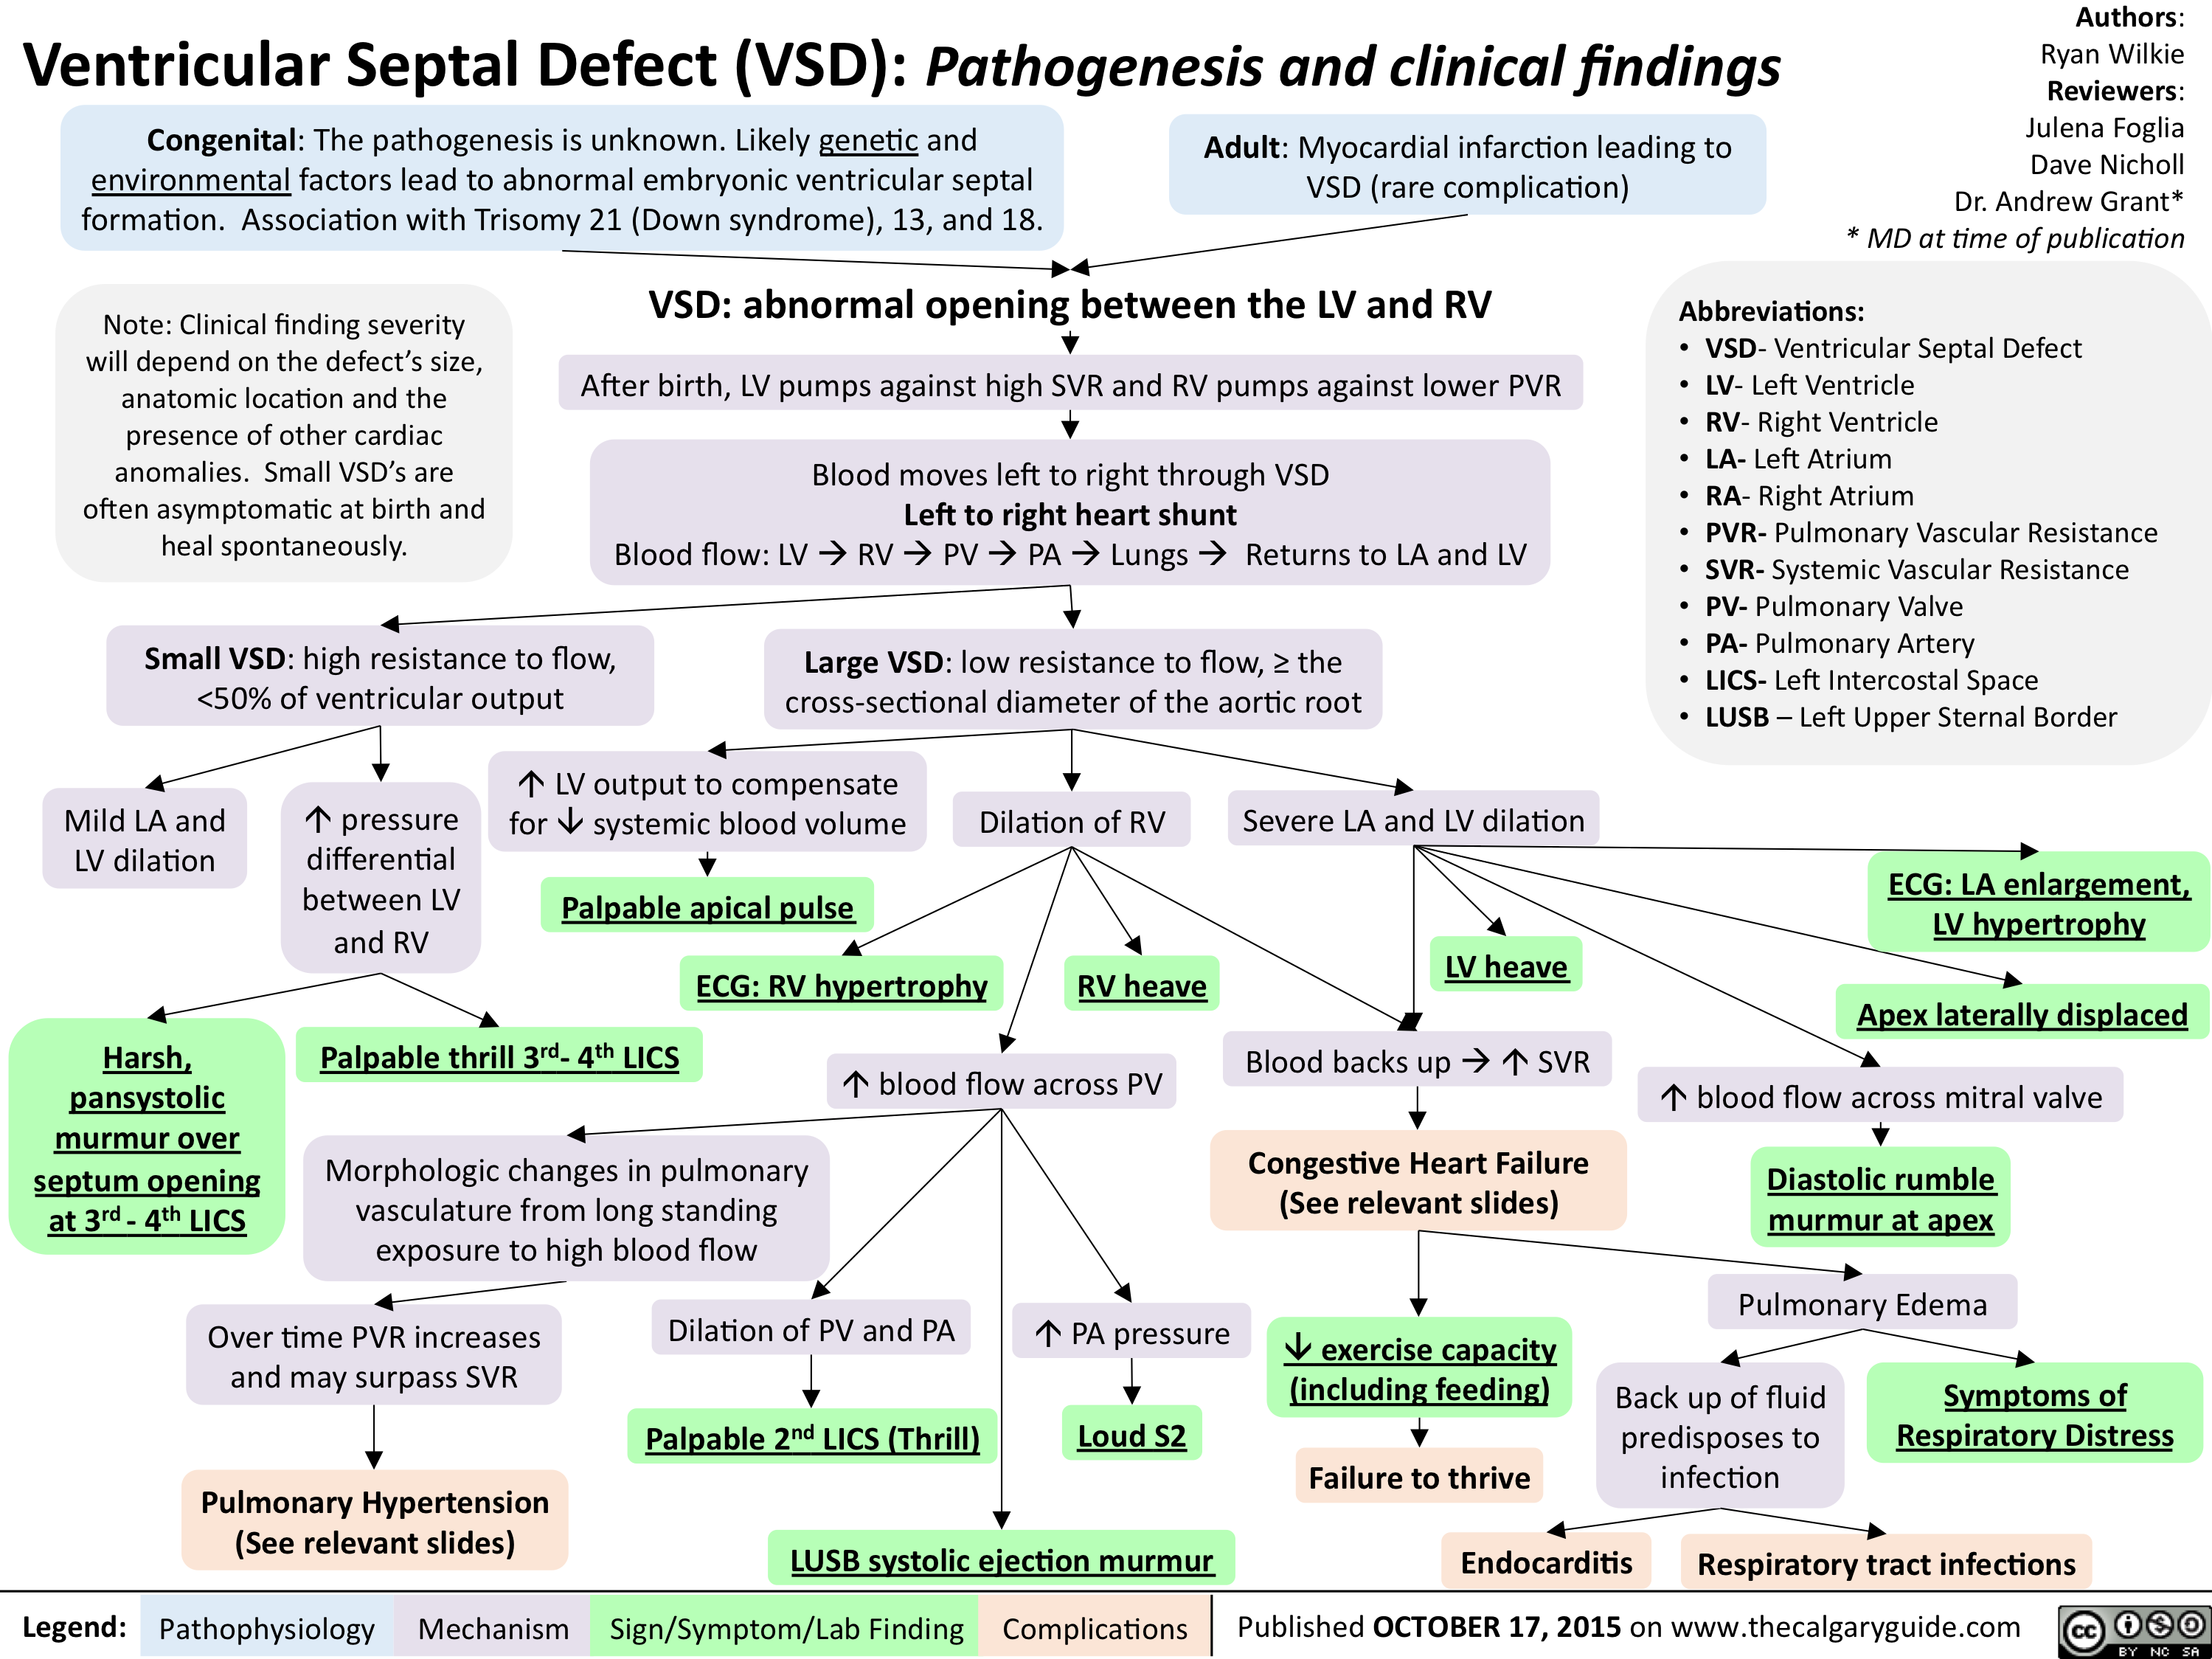 Ventricular Septal Defect Vsd Pathogenesis And Clinical Findings